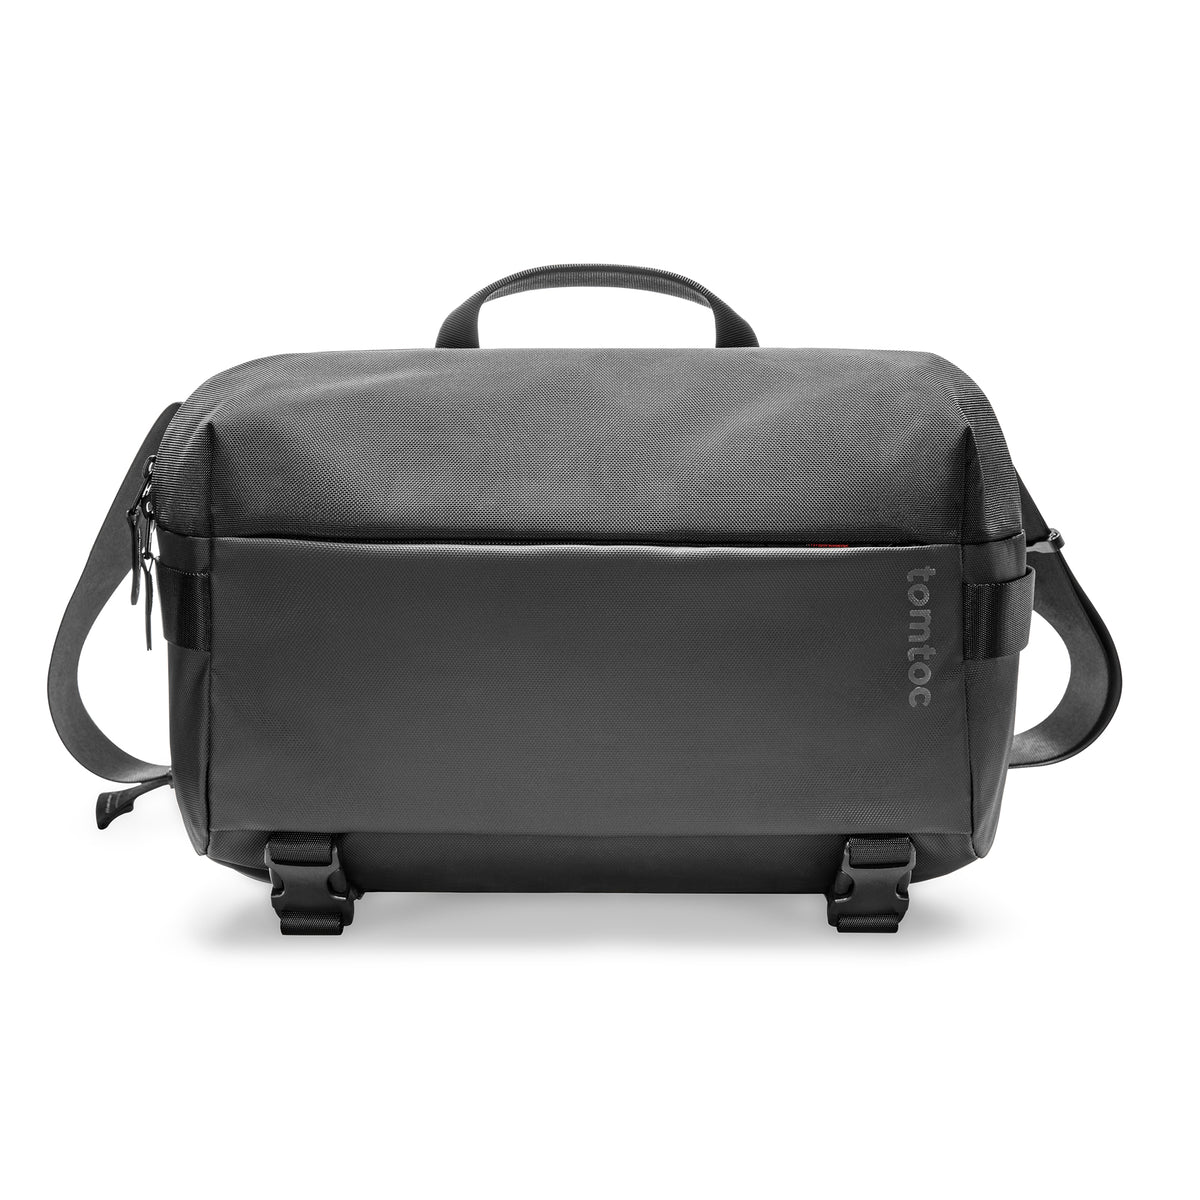 tomtoc 14 Inch Compact EDC Laptop Sling Bag - Black